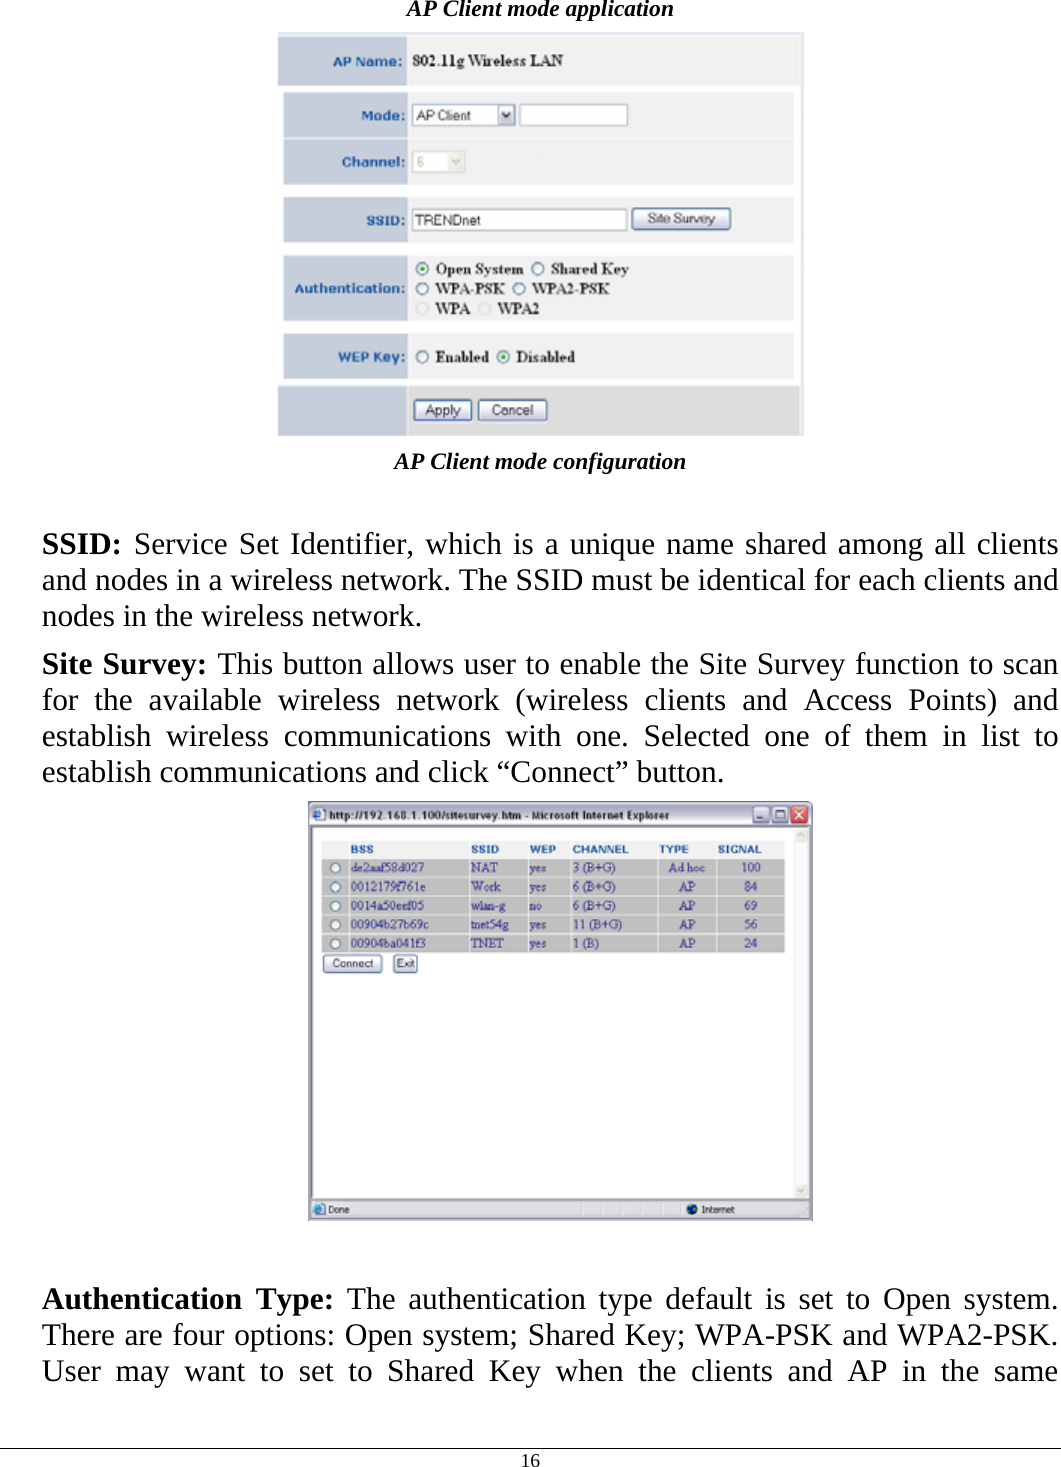  16 AP Client mode application  AP Client mode configuration  SSID: Service Set Identifier, which is a unique name shared among all clients and nodes in a wireless network. The SSID must be identical for each clients and nodes in the wireless network. Site Survey: This button allows user to enable the Site Survey function to scan for the available wireless network (wireless clients and Access Points) and establish wireless communications with one. Selected one of them in list to establish communications and click “Connect” button.   Authentication Type: The authentication type default is set to Open system.  There are four options: Open system; Shared Key; WPA-PSK and WPA2-PSK. User may want to set to Shared Key when the clients and AP in the same 